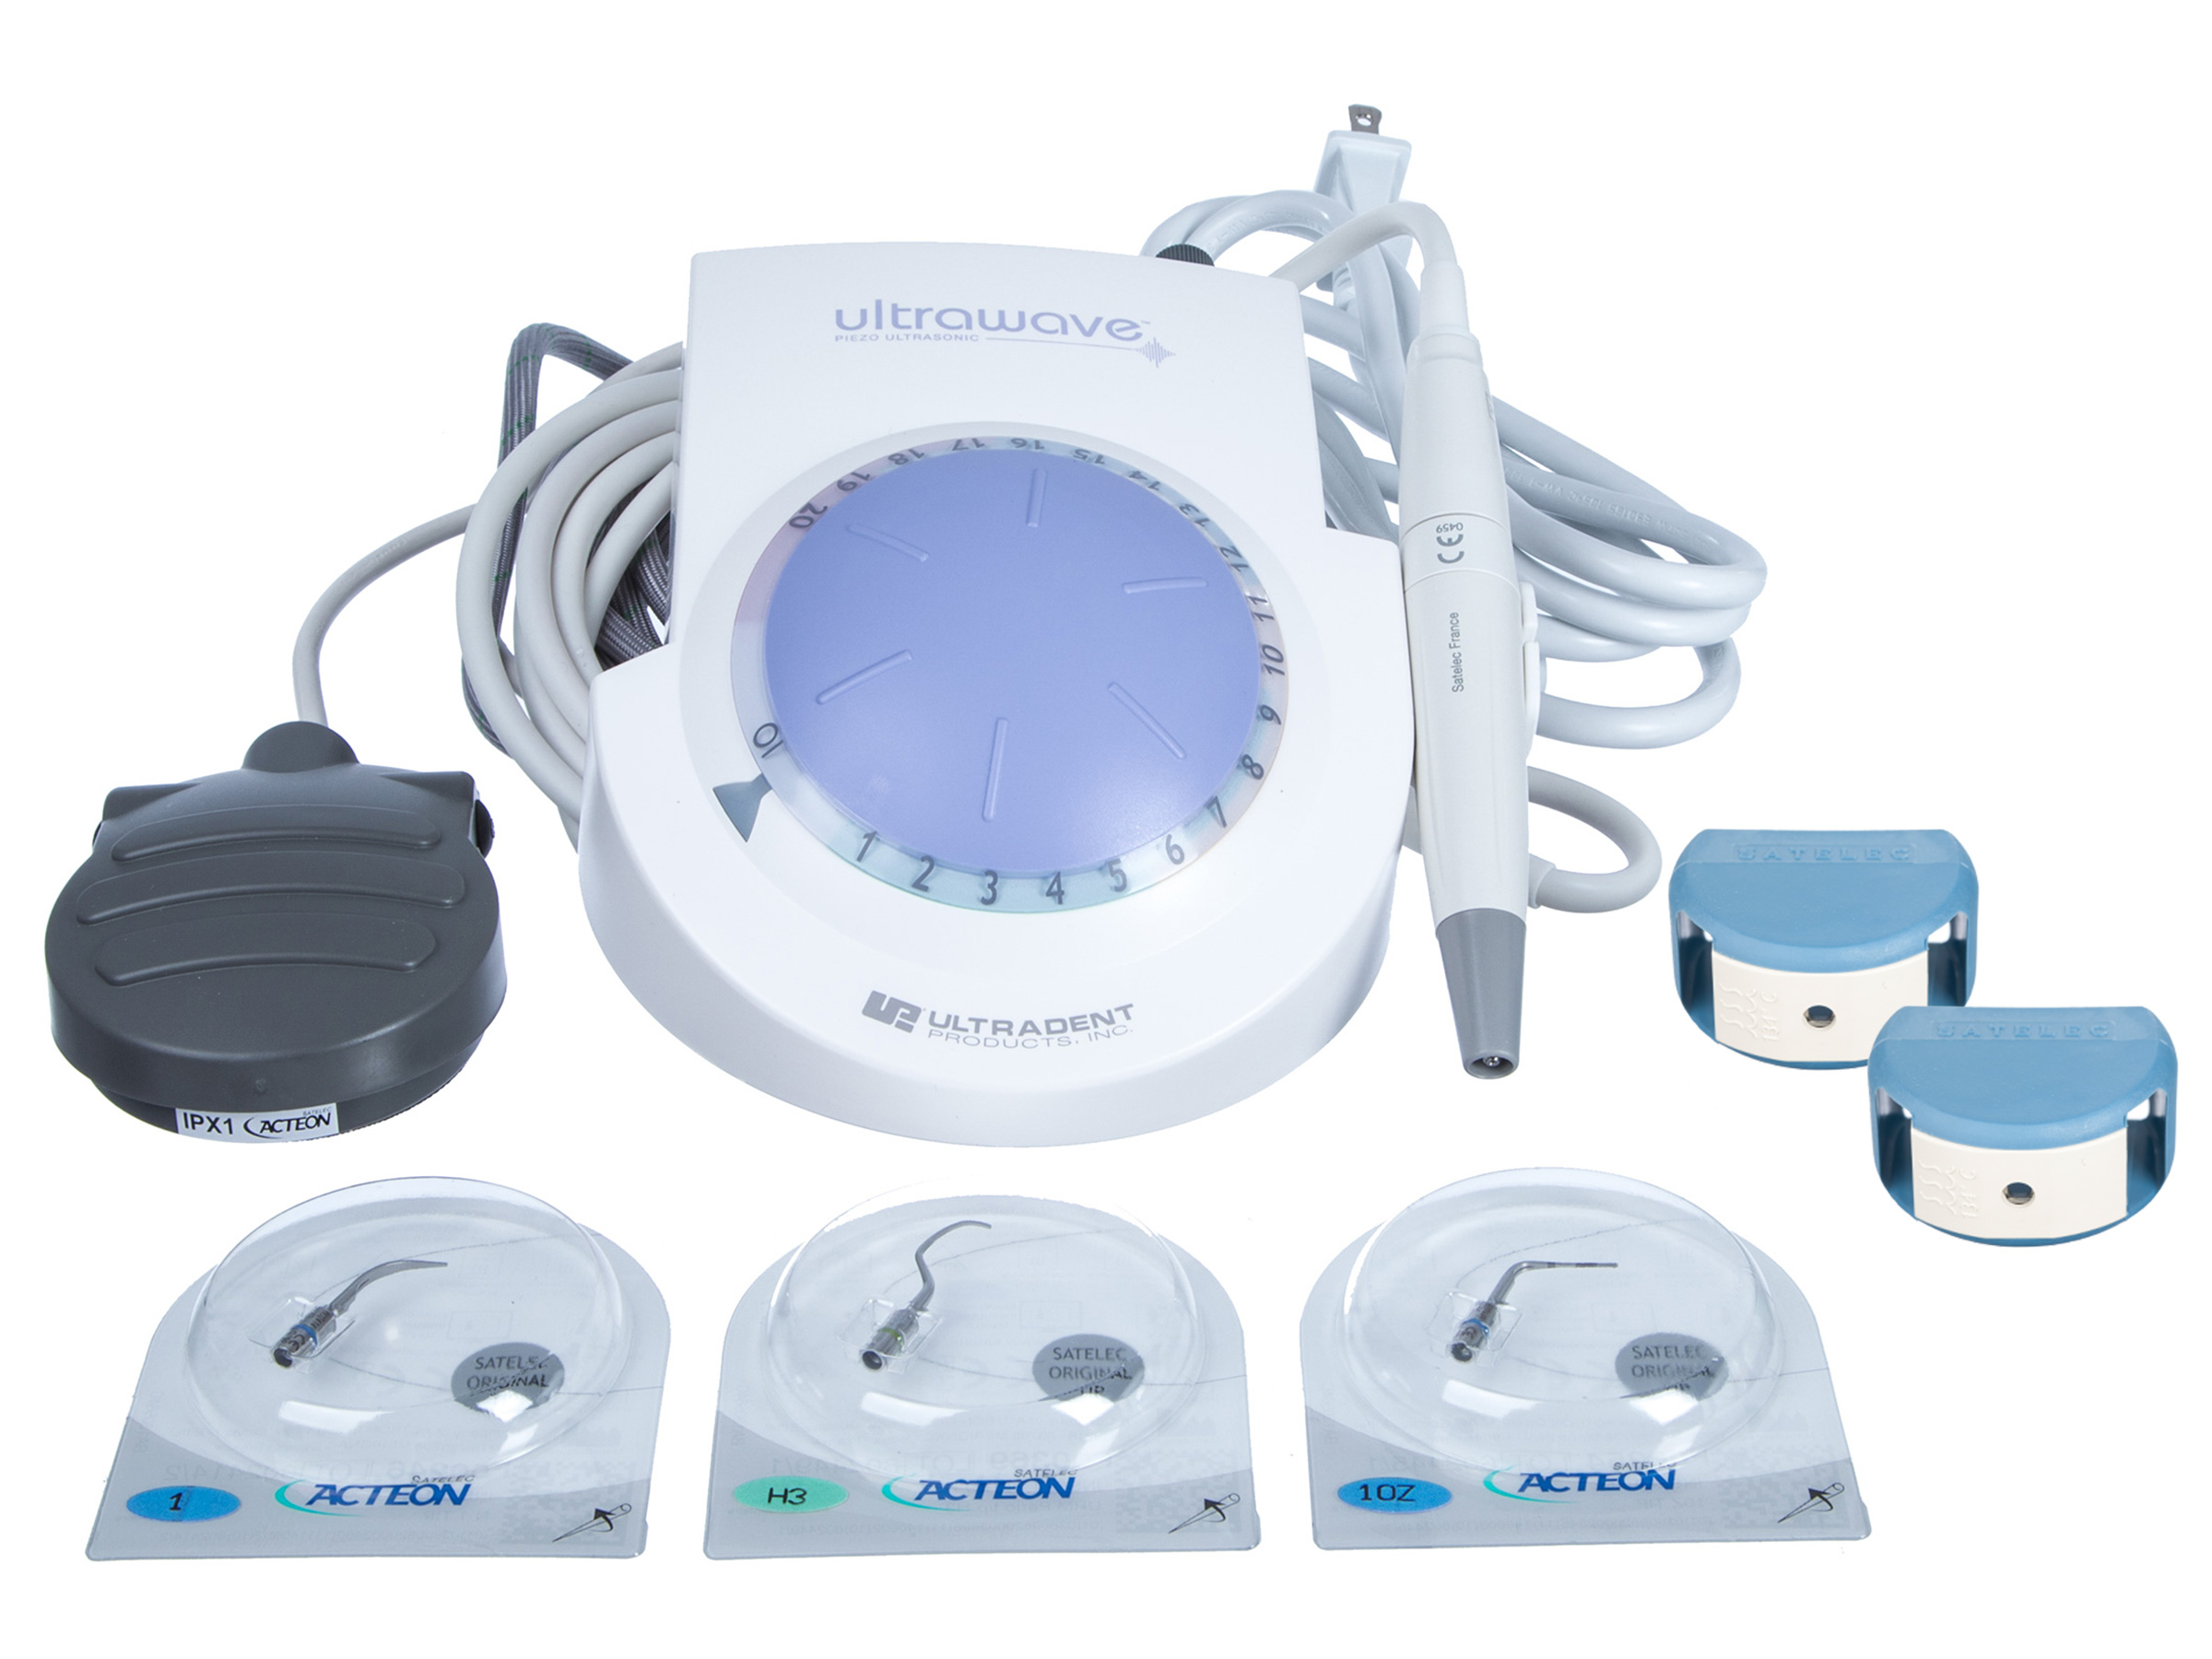 China Highly advanced shock wave therapy ultrasonic portable ultrawave ultrasound  therapy machine -SW10 factory and suppliers